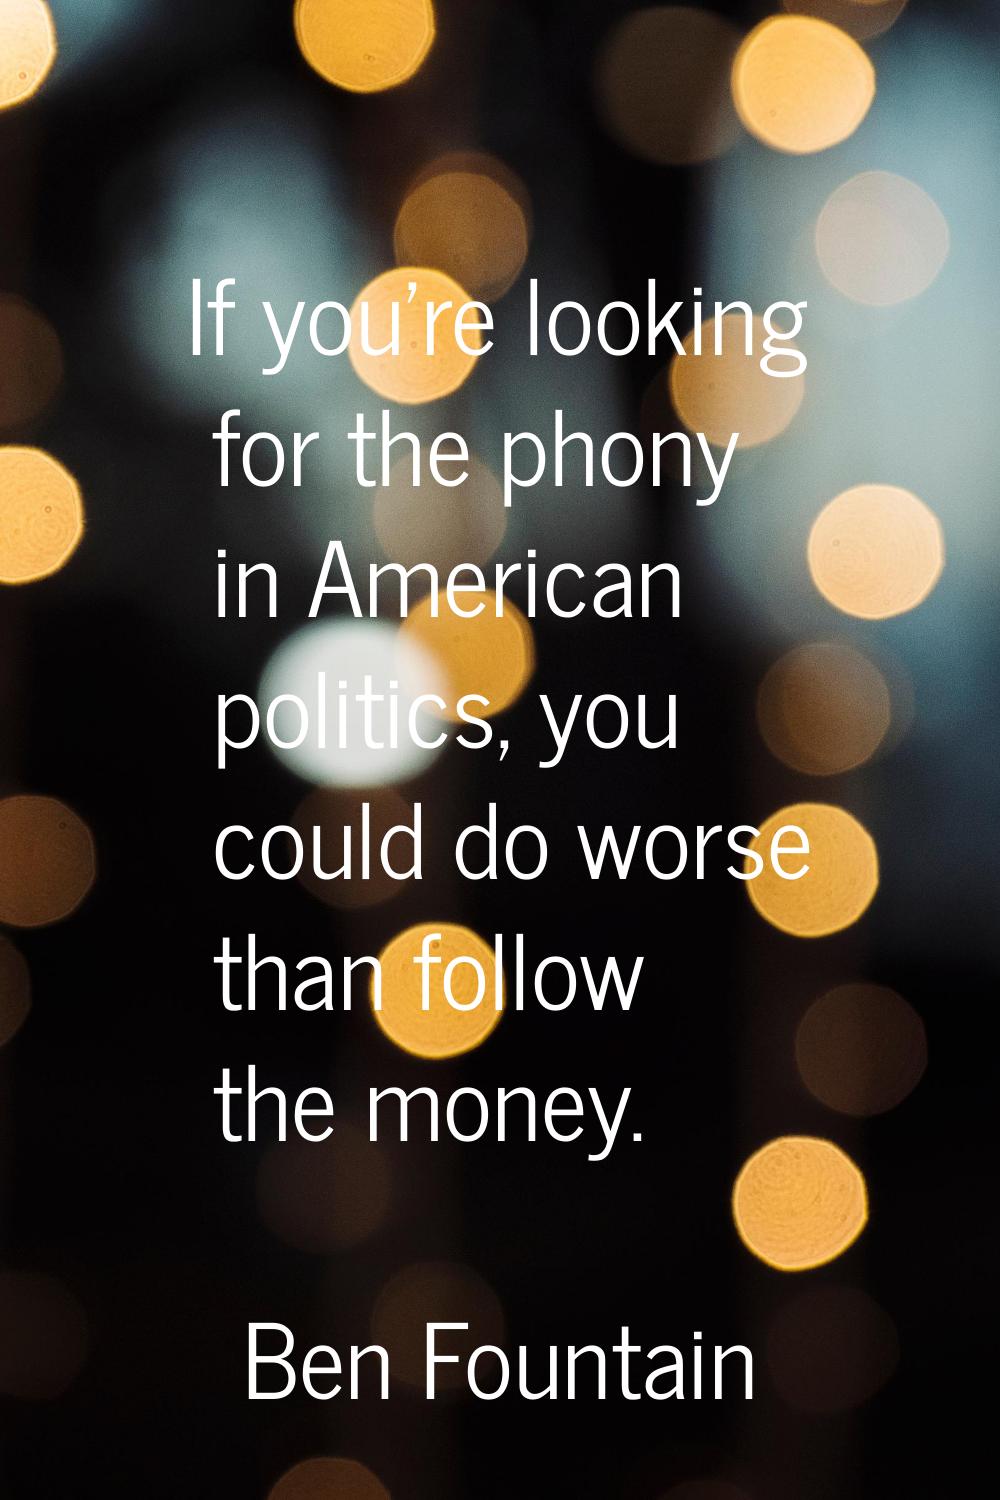 If you're looking for the phony in American politics, you could do worse than follow the money.